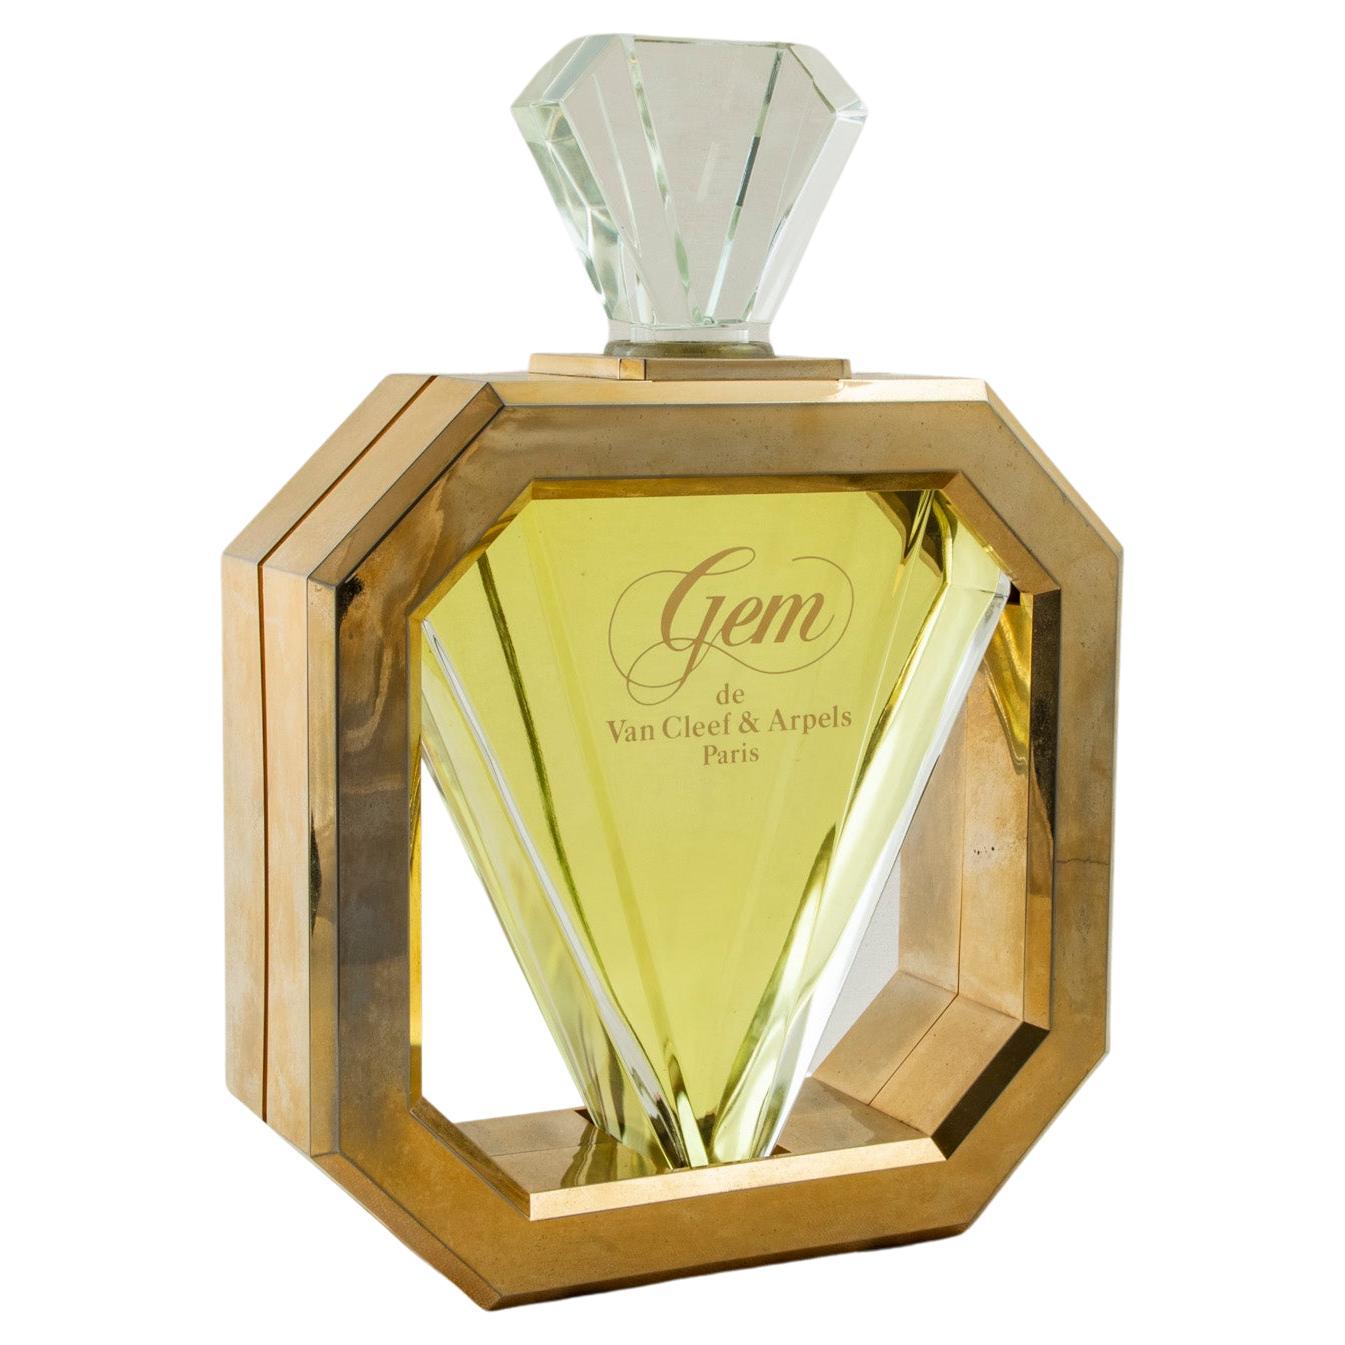 Standing at 13.25 inches in height, this large scale glass perfume factice is marked Gem de Van Cleef & Arpels, Paris. Originally used in a French perfume shop for window display when the perfume made its debut in 1987, this factice has an octagonal